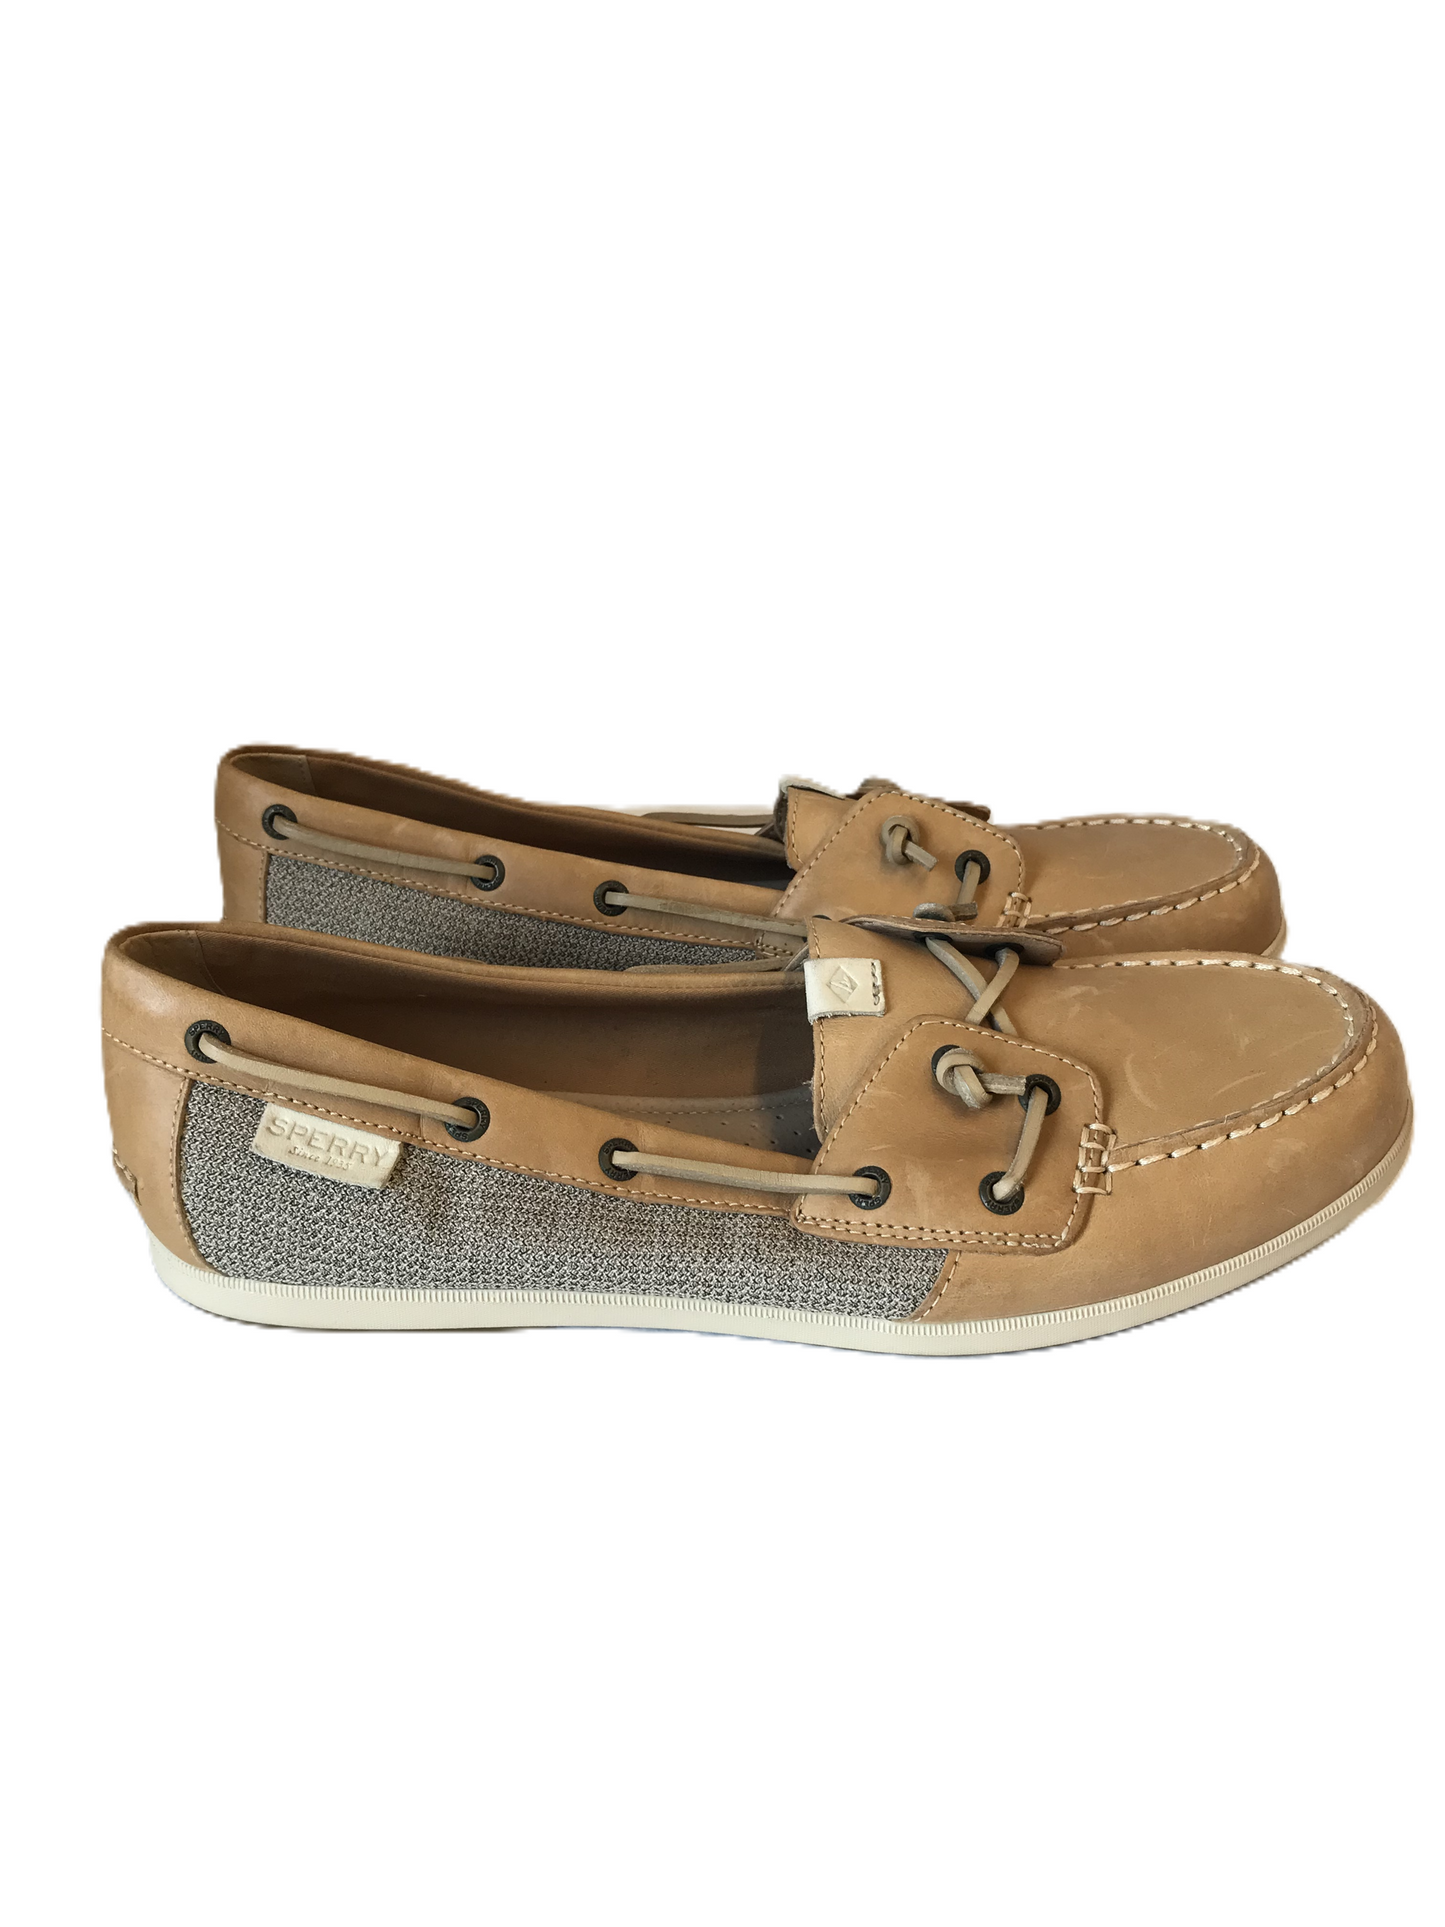 Brown Shoes Flats By Sperry, Size: 11